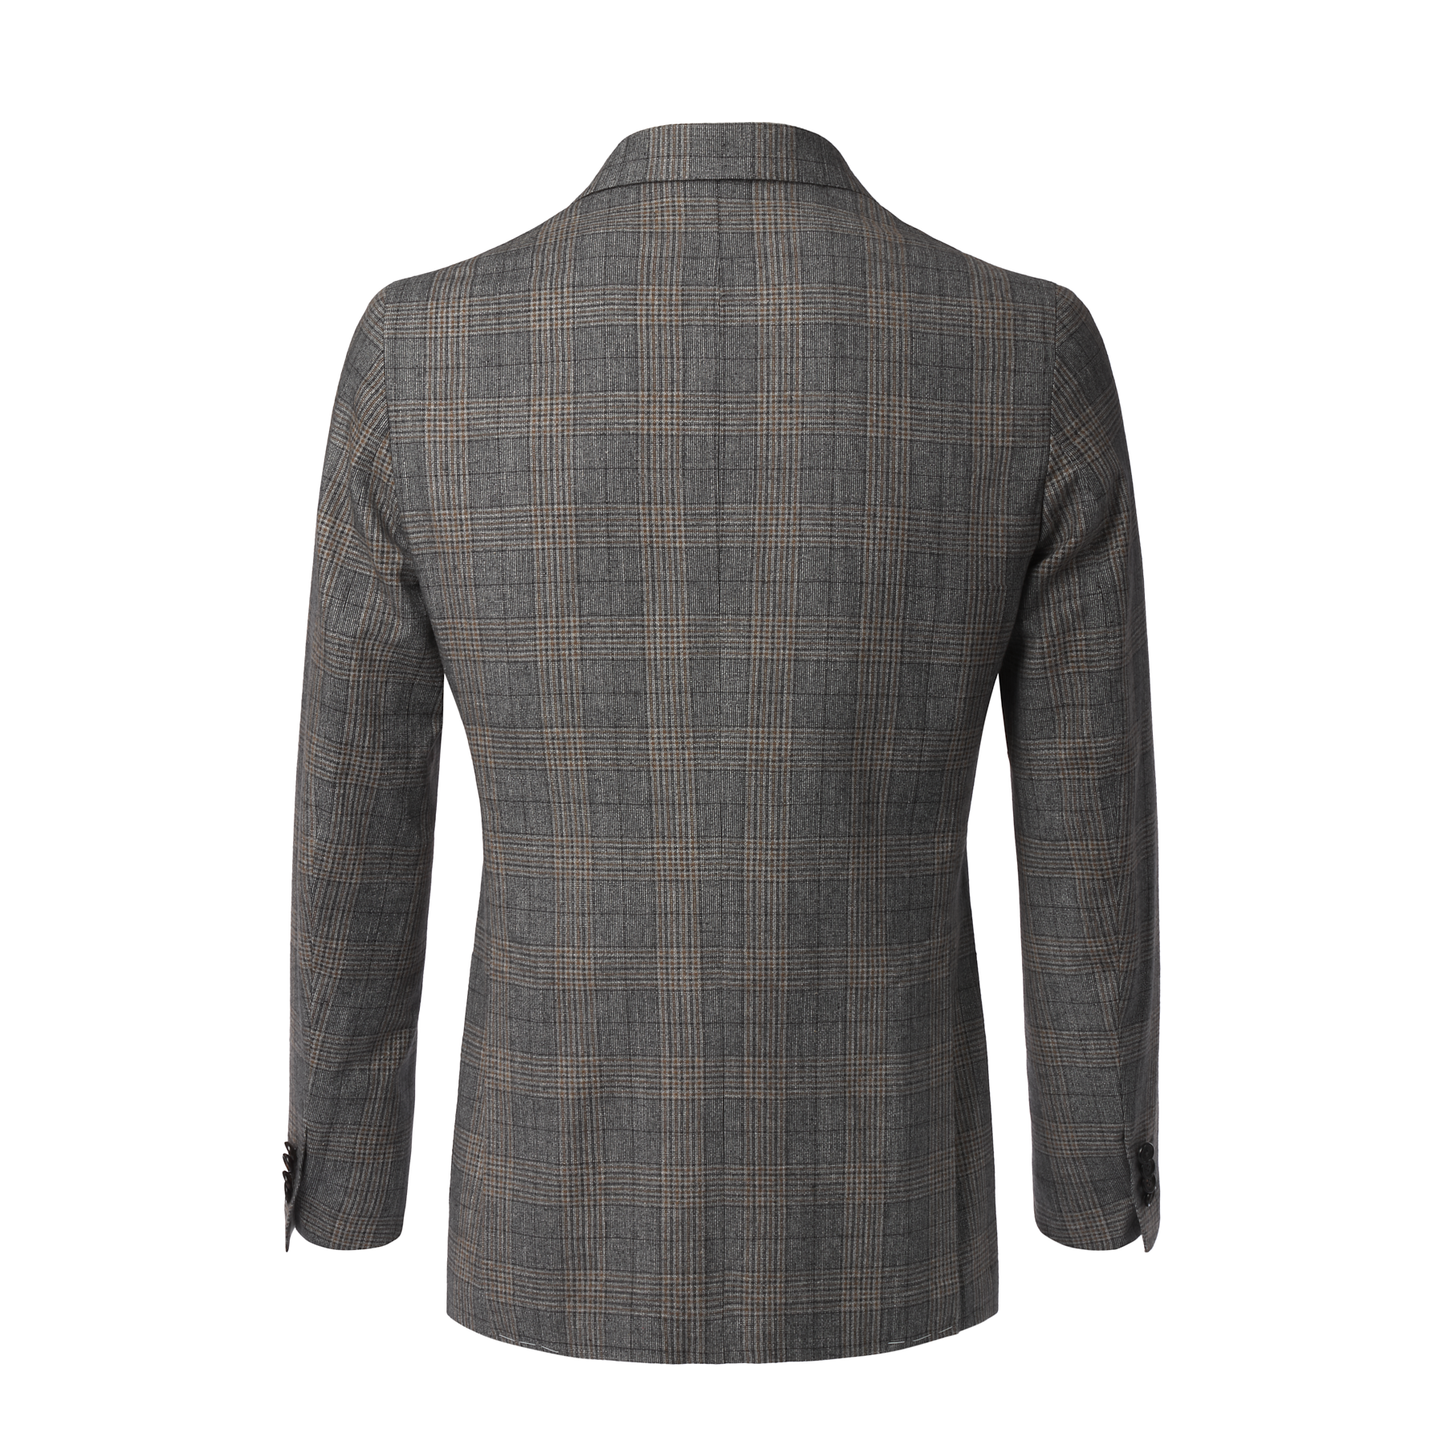 De Petrillo Single-Breasted Glencheck Wool and Silk-Blend Jacket in Light Grey. Exclusively Made for Sartale - SARTALE